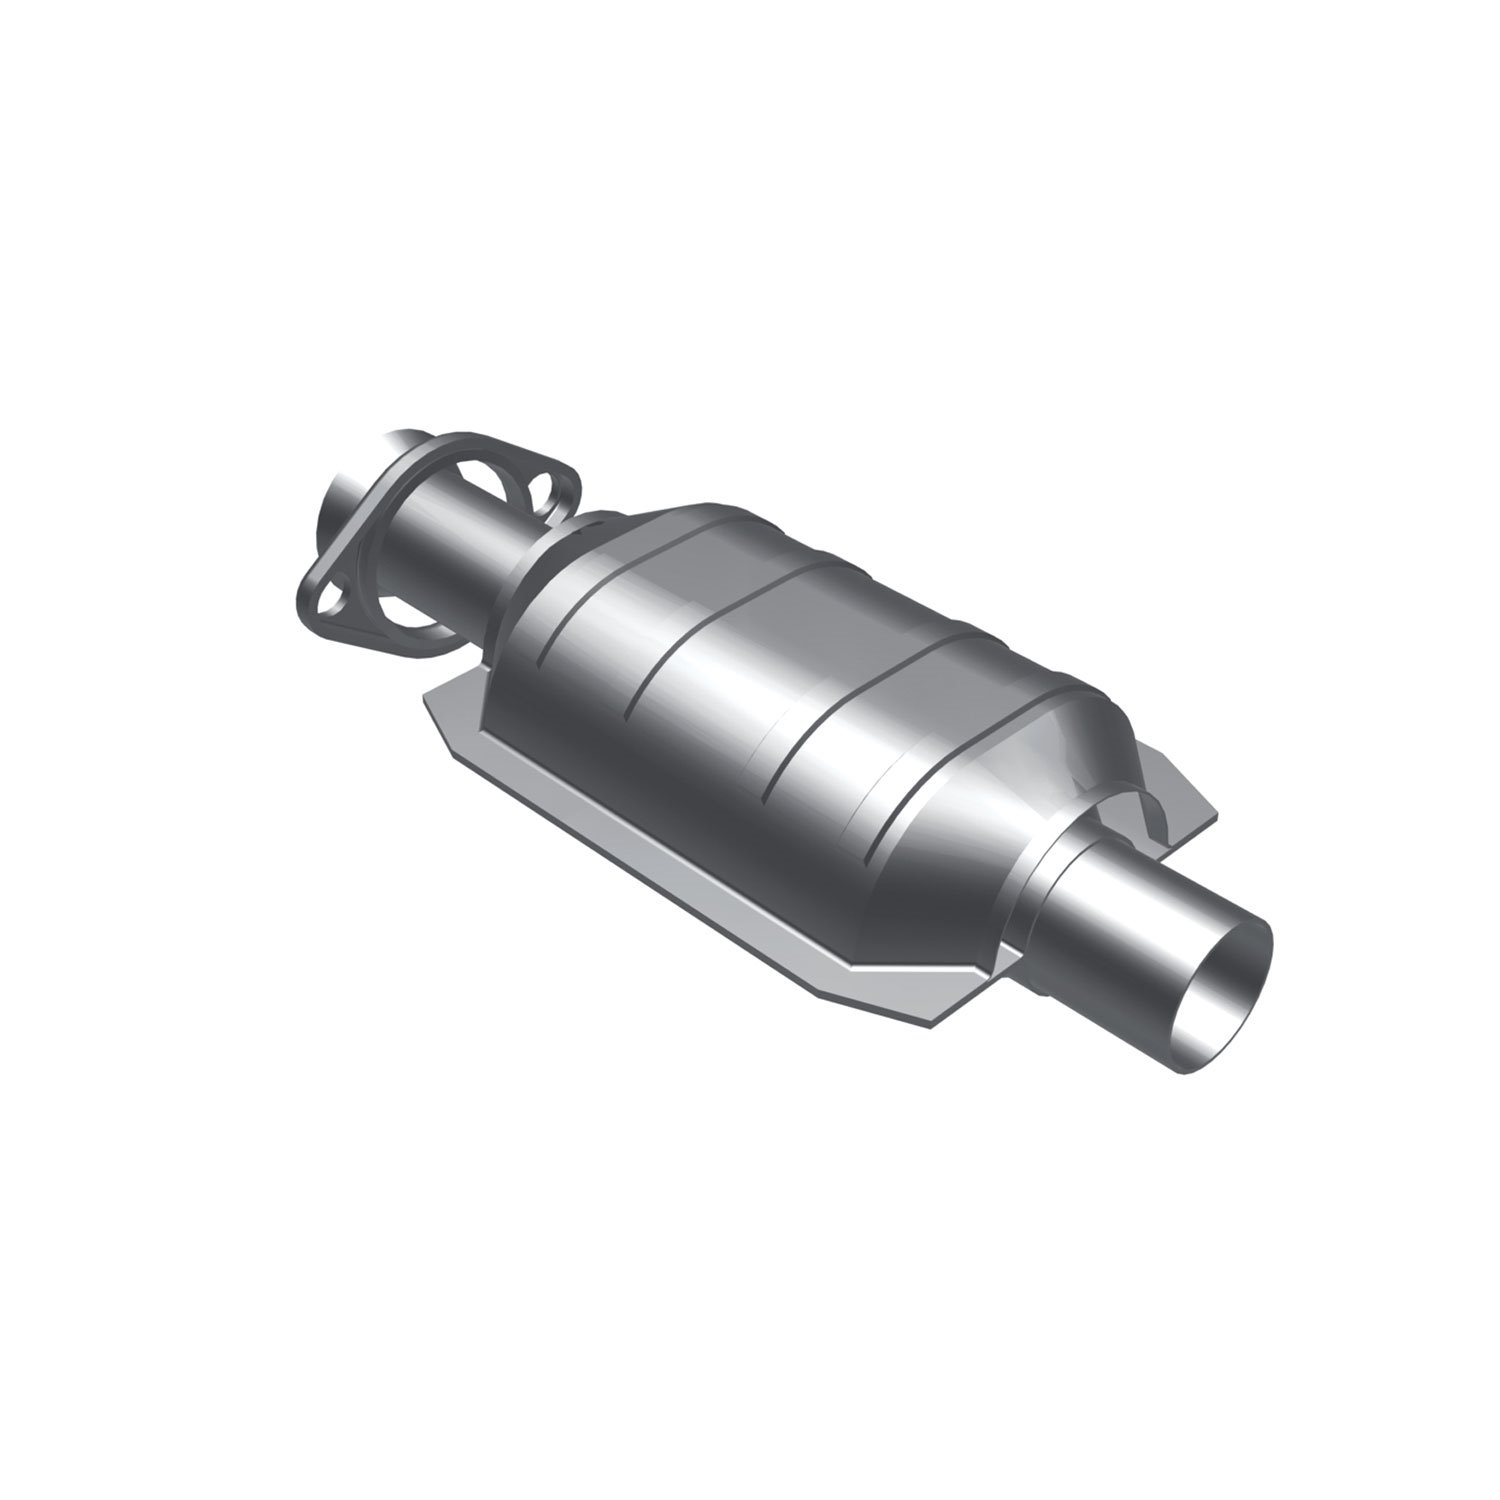 Standard Grade Federal / EPA Compliant Direct-Fit Catalytic